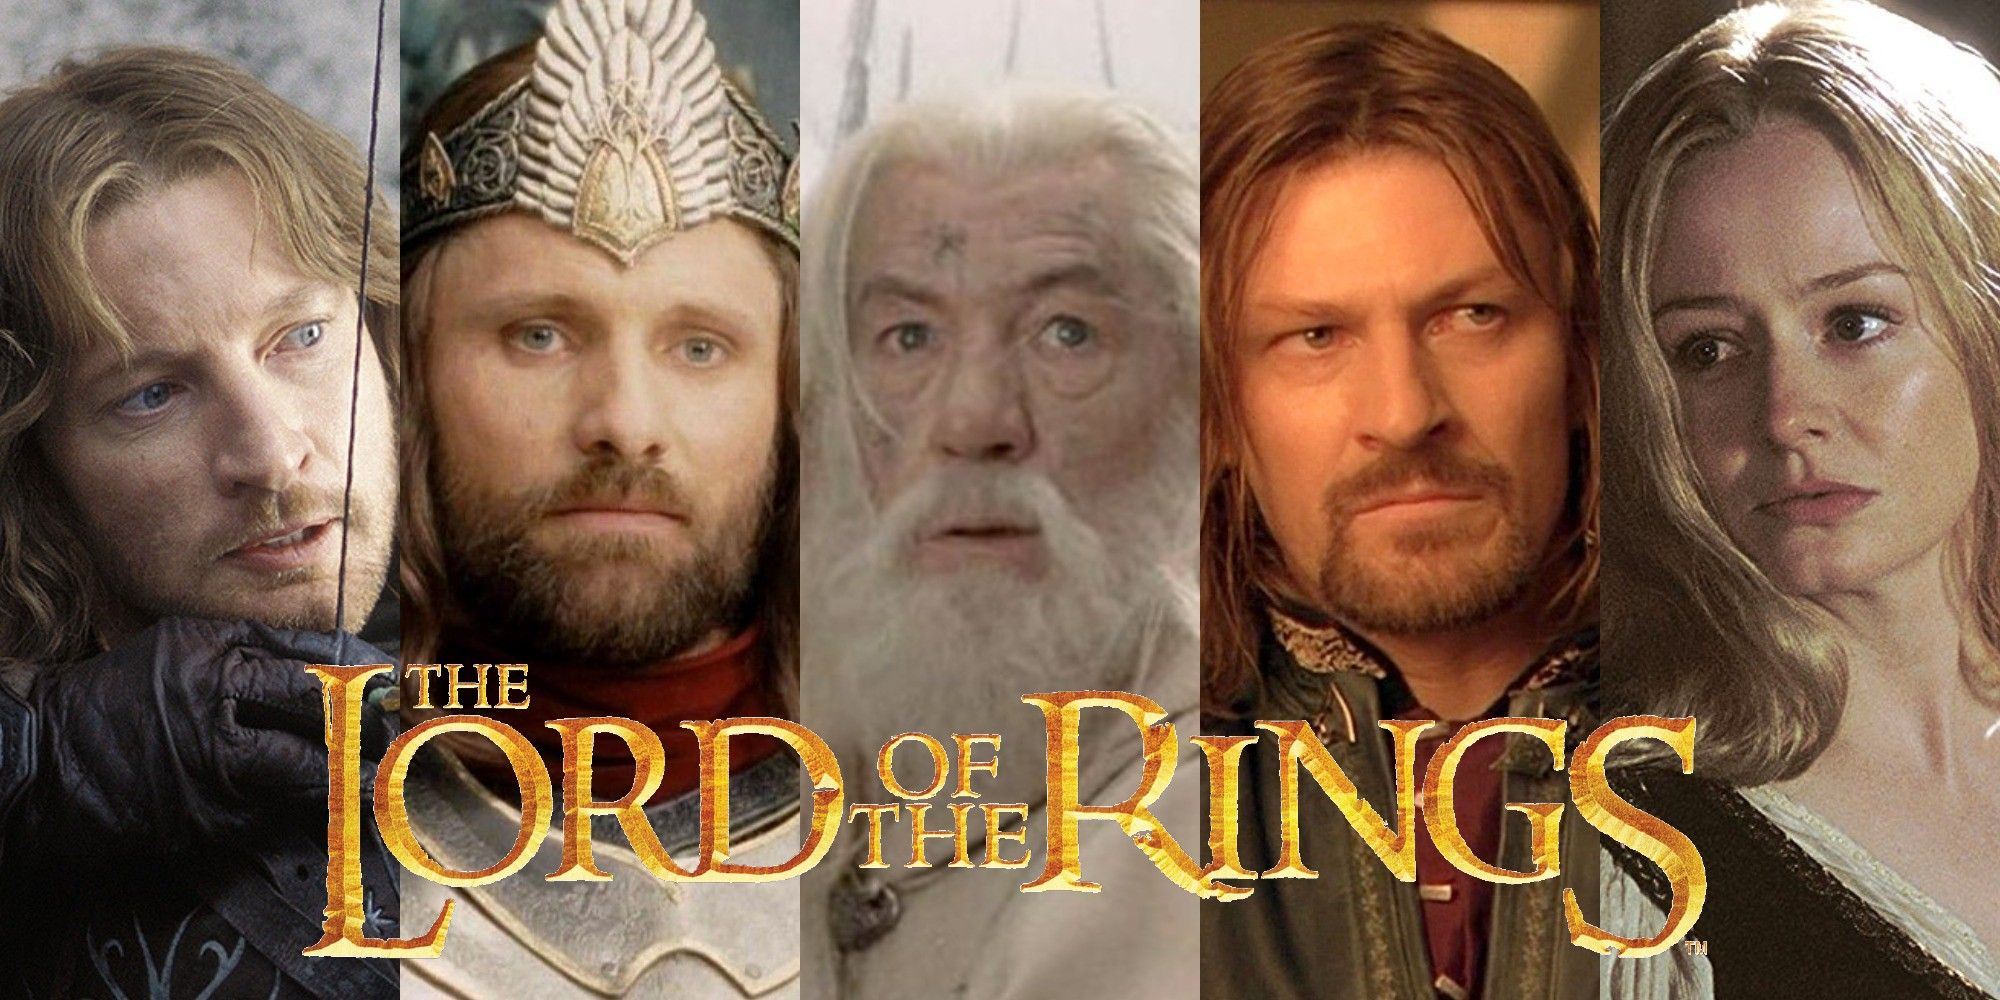 Split image of Faramir, Aragorn, Gandalf, Boromir and Eowyn from The Lord of the Rings movies with the logo on top